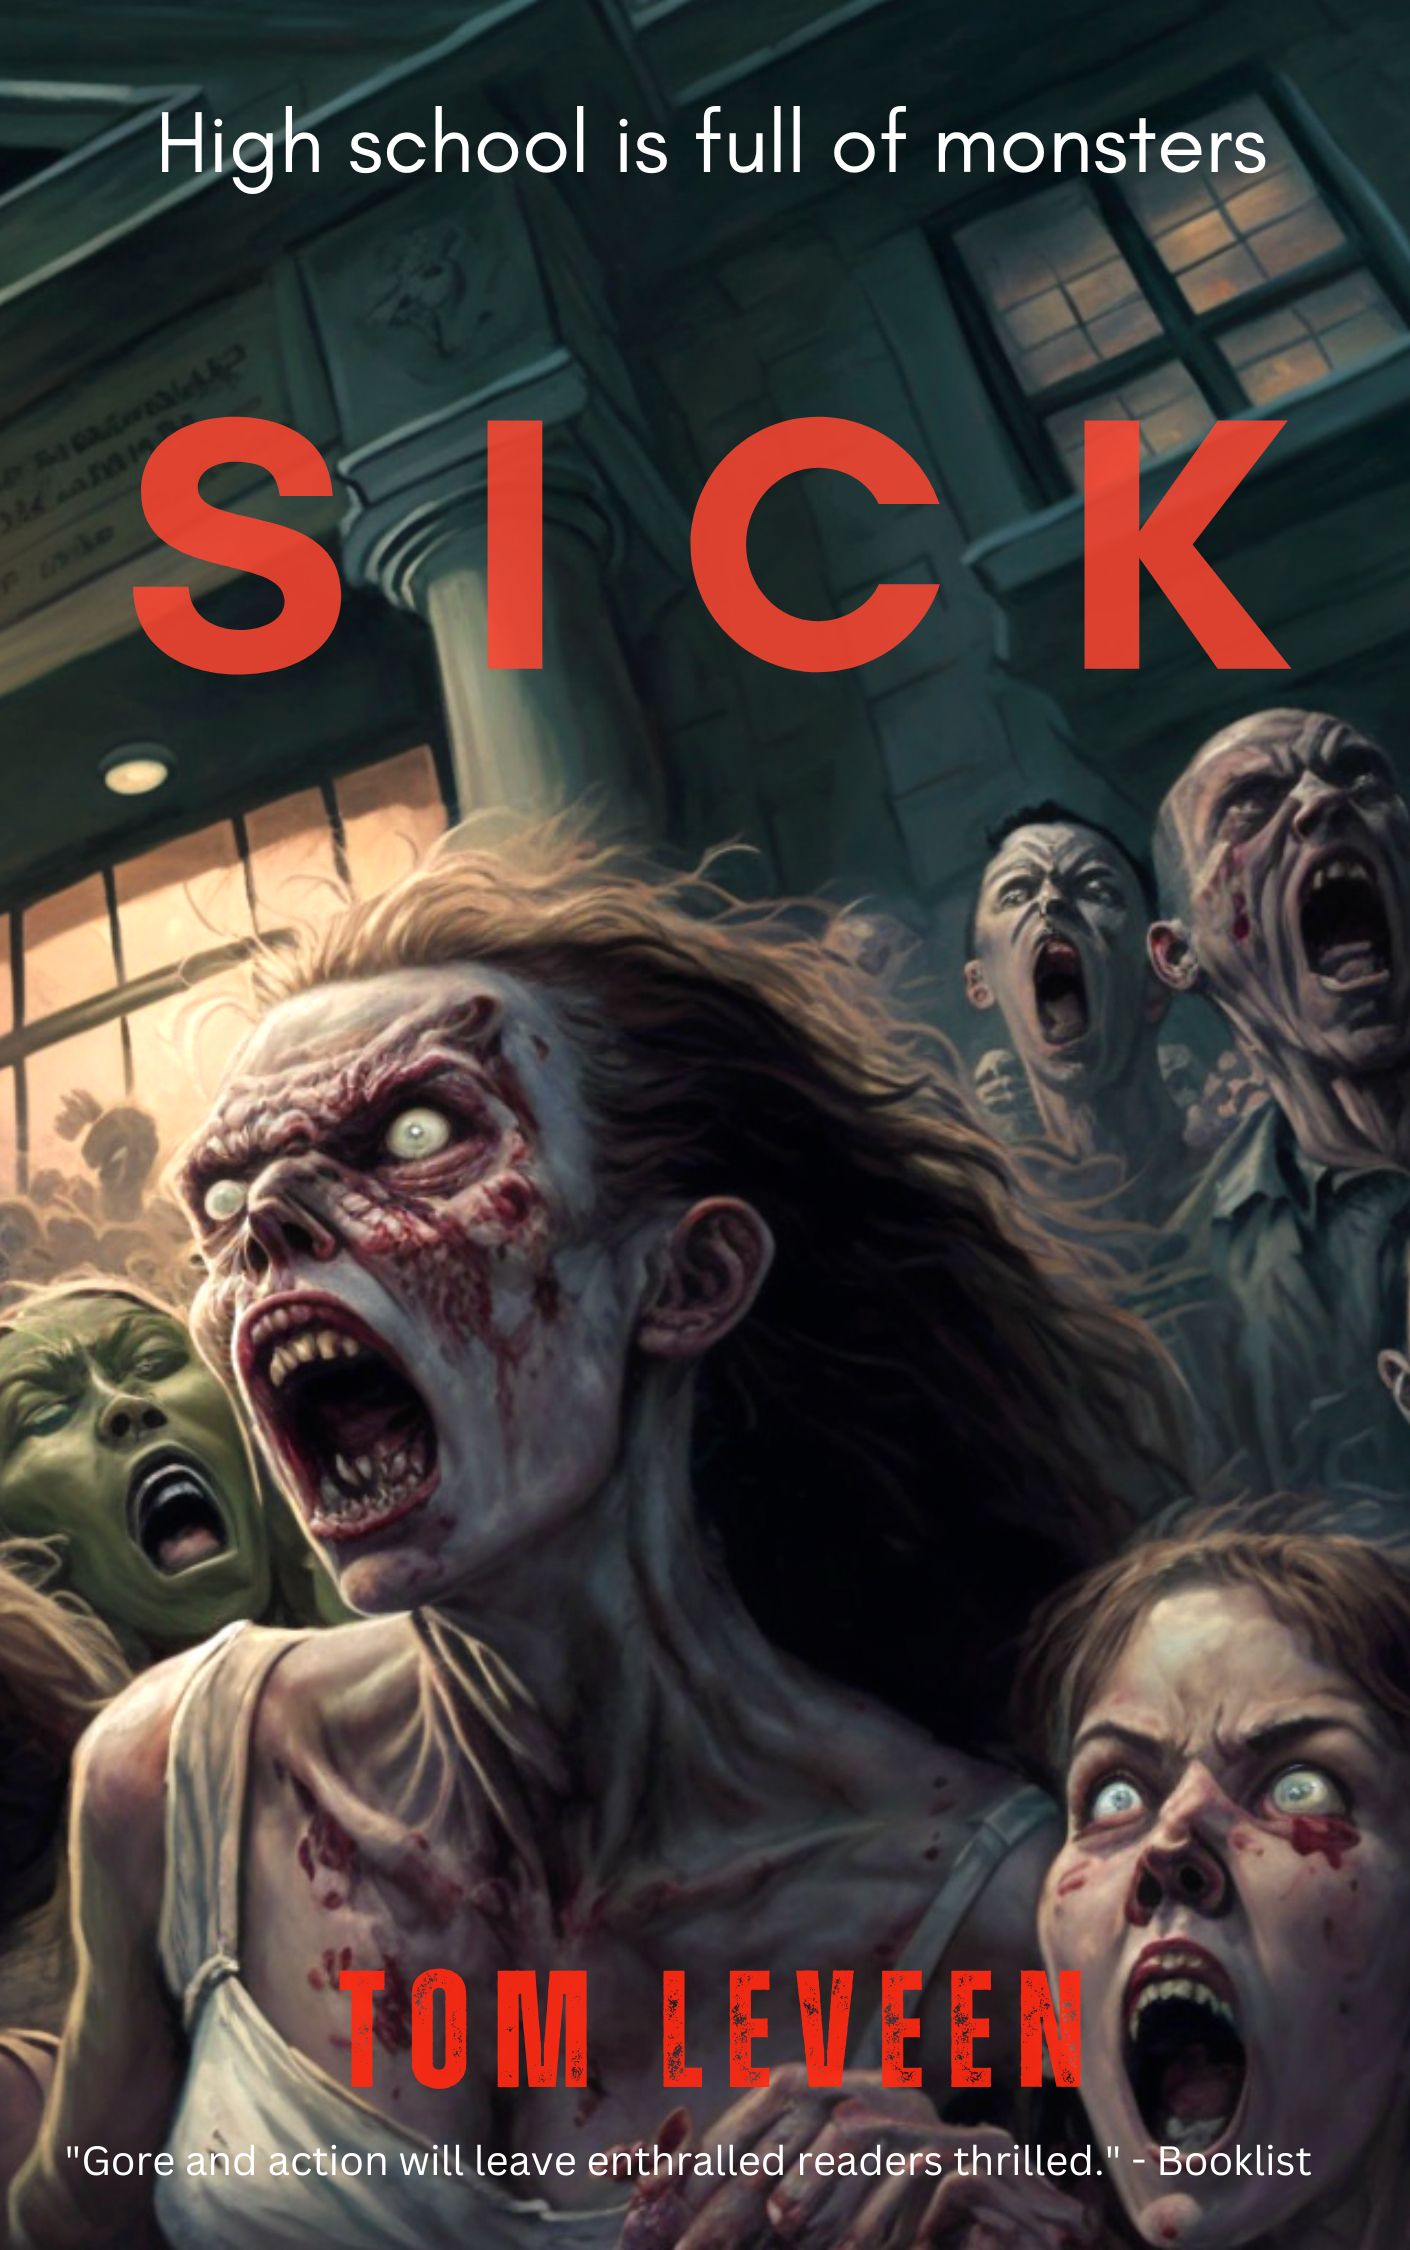 SICK by Tom Leveen